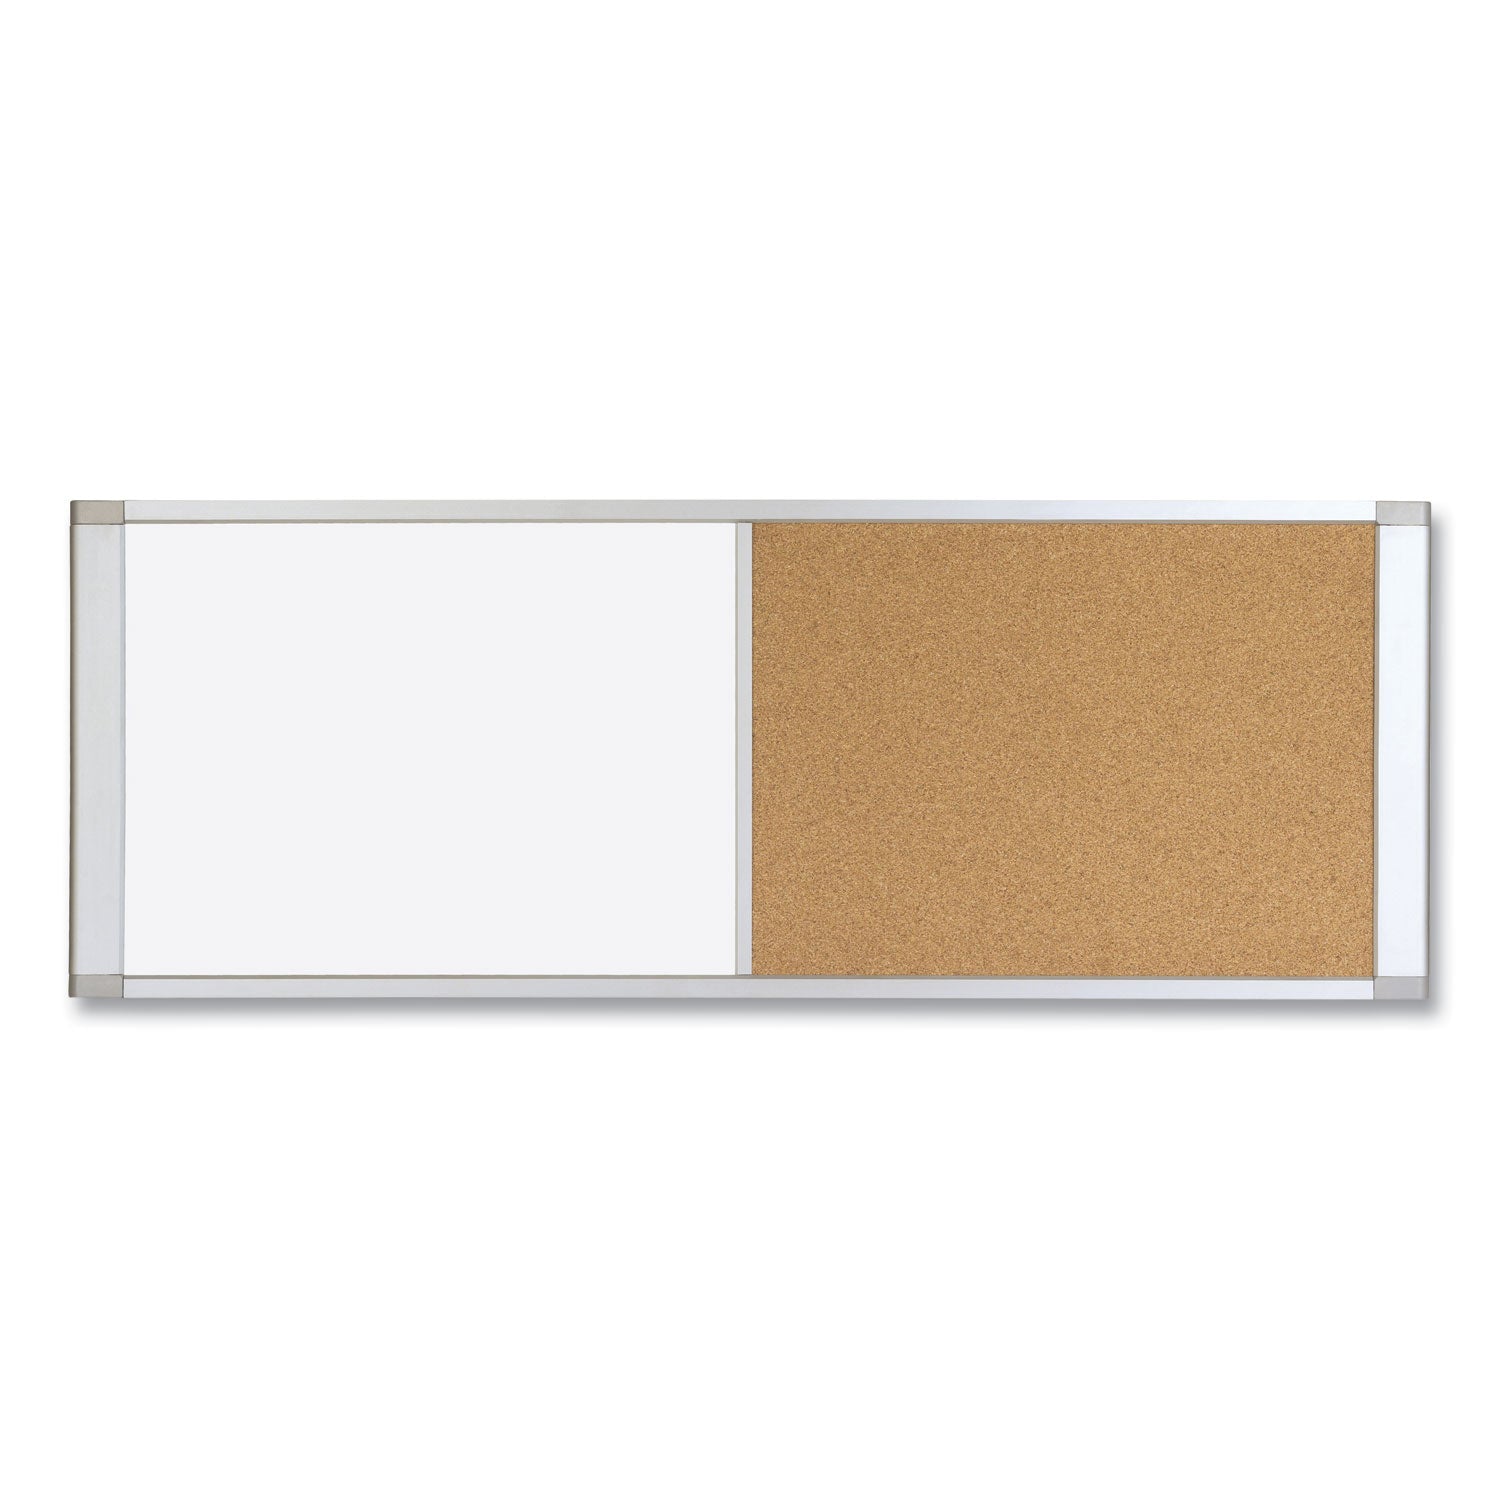 Combo Cubicle Workstation Dry Erase/Cork Board, 36 x 18, Tan/White Surface, Aluminum Frame - 